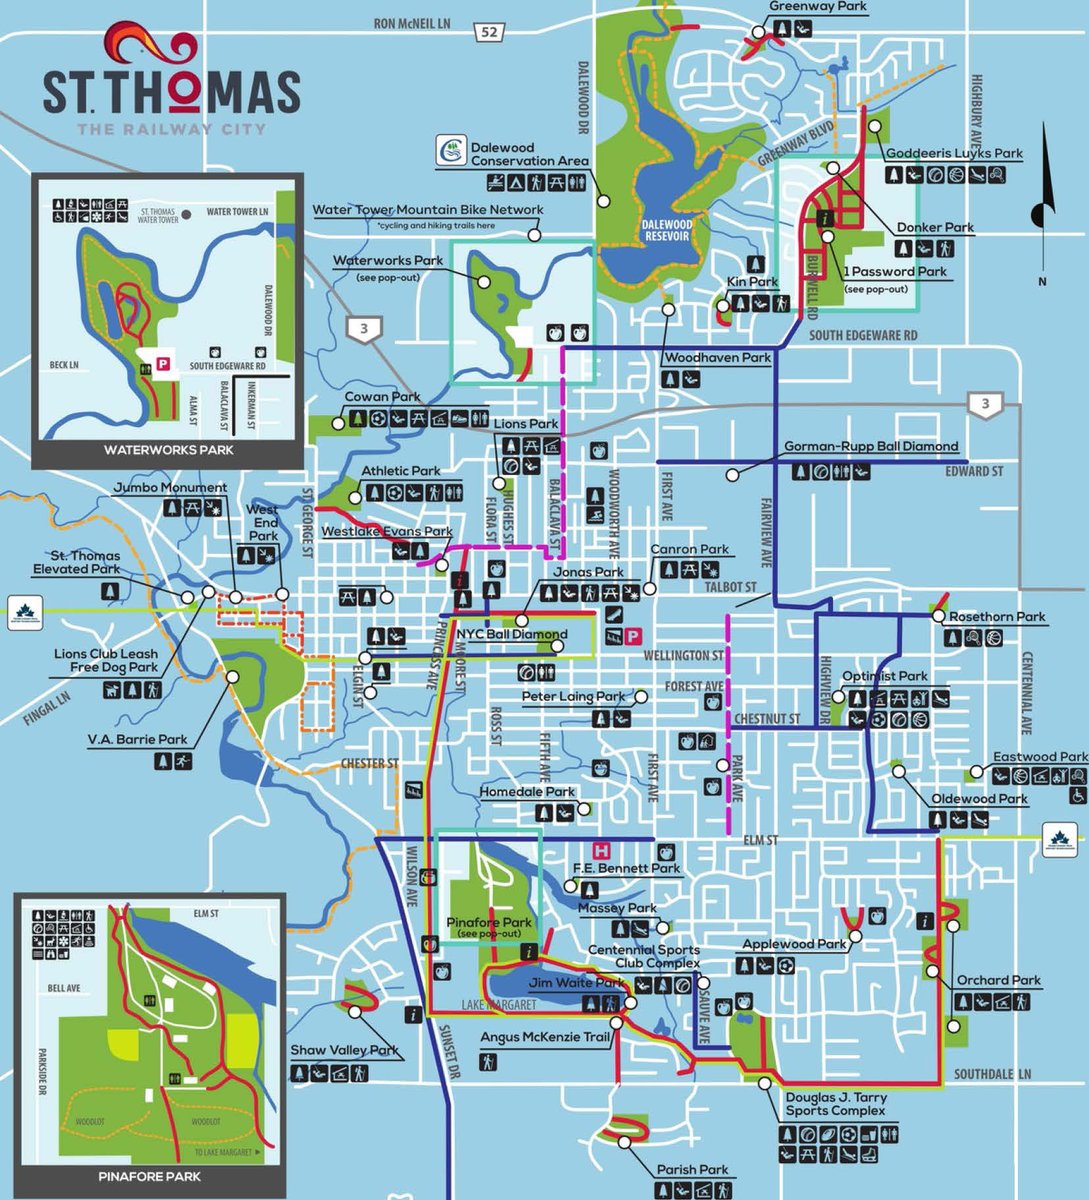 Explore the Trails of St. Thomas! Whether you're a hiking enthusiast, a biking aficionado, or a history buff, St. Thomas has the perfect trail for you! Discover all these and more on the NEW St. Thomas Trail Map! Perfect for planning your next adventure in the great outdoors.